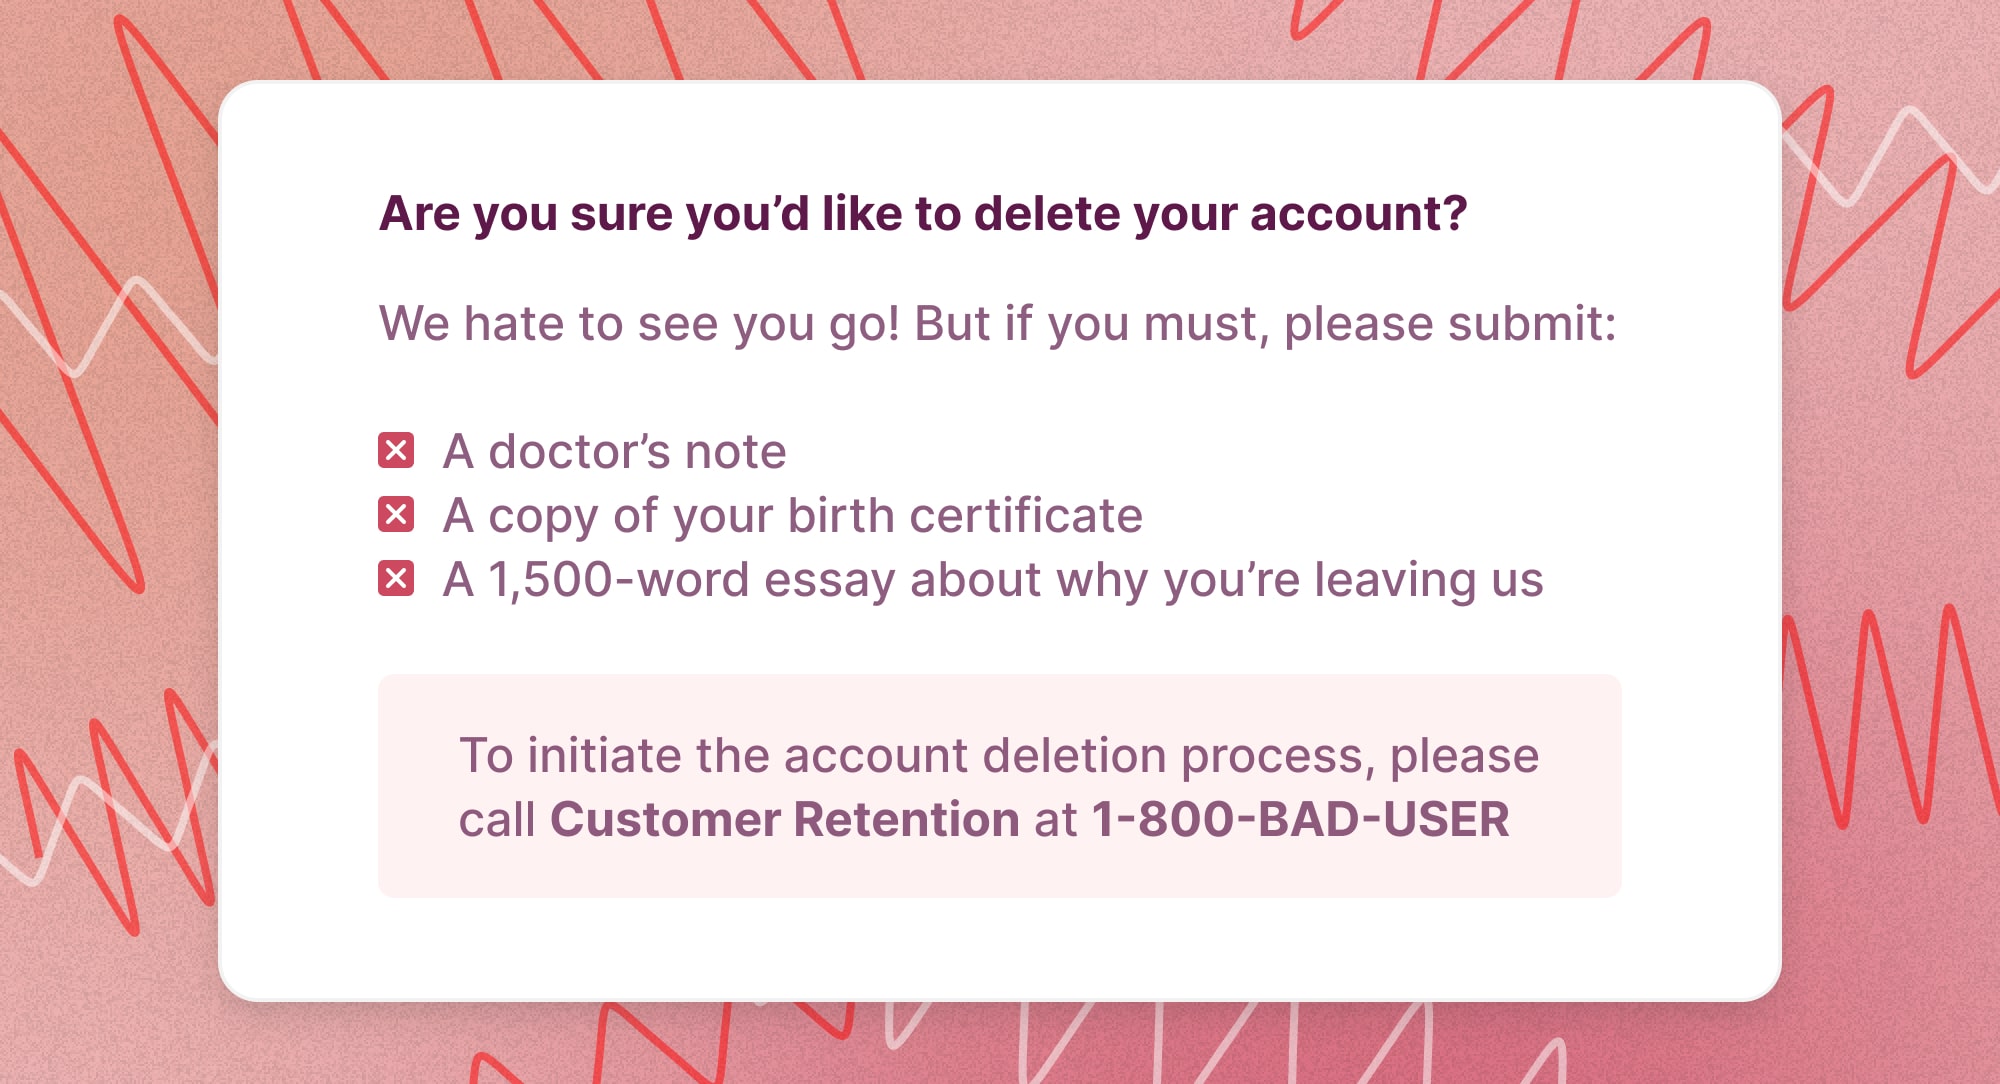 A bad example of UI that makes it hard for users' to delete their accounts, reading 'Are you sure you'd like to delete your account? We hate to see you go! But if you must, please submit: a doctor's note, a copy of your birth certificate, a 1,500 word essay about why you're leaving us'